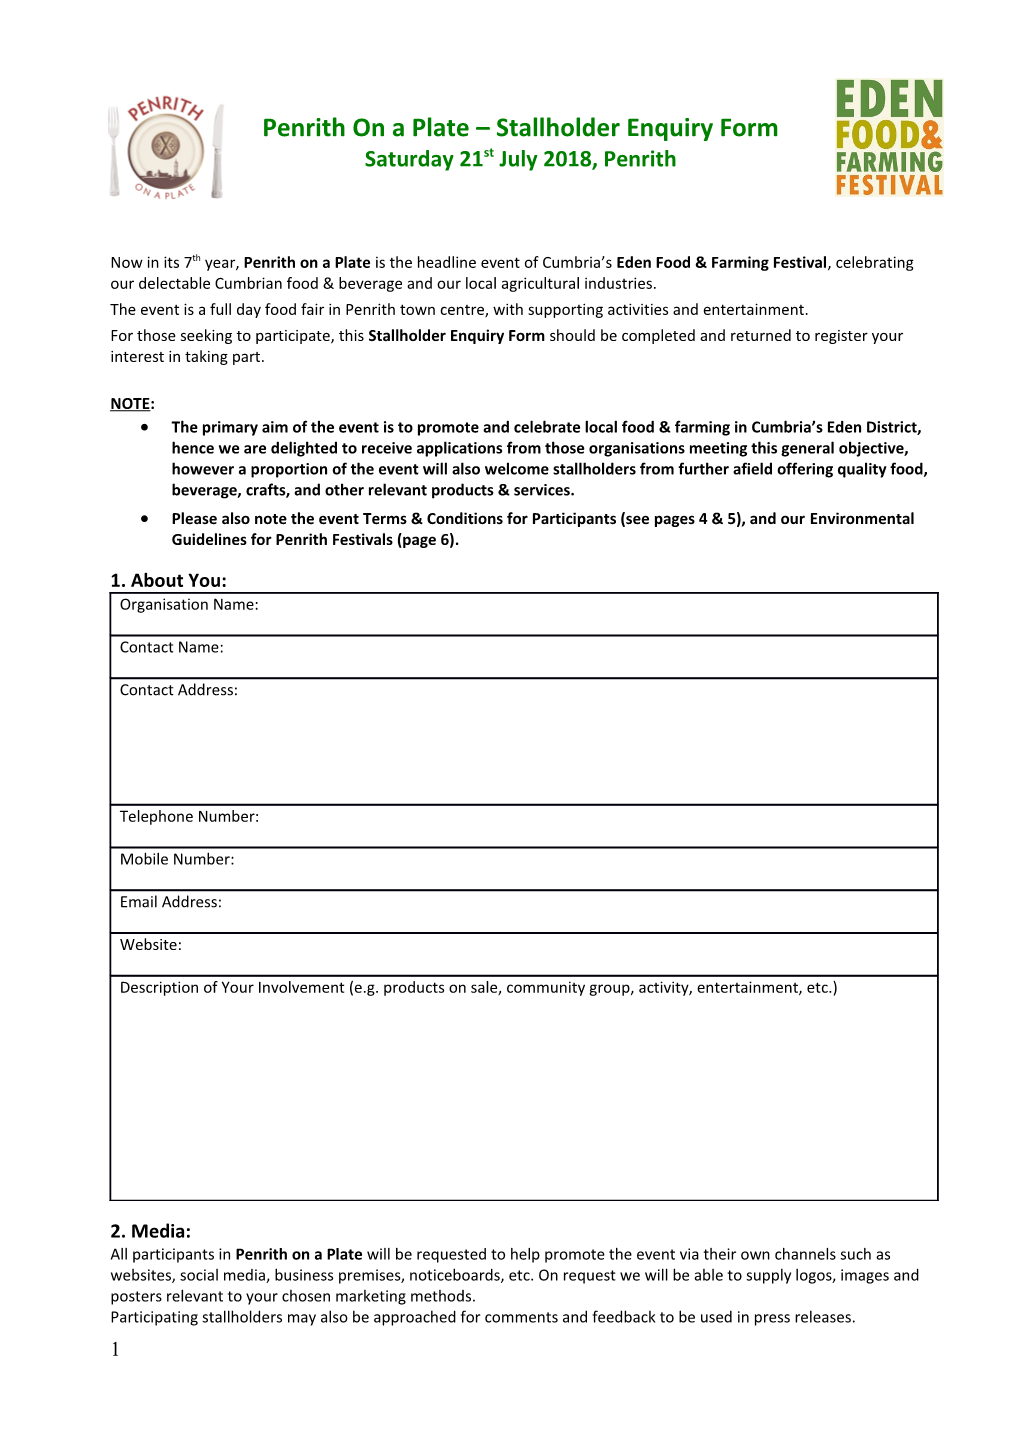 Penrith on a Plate Stallholder Enquiry Form 2018